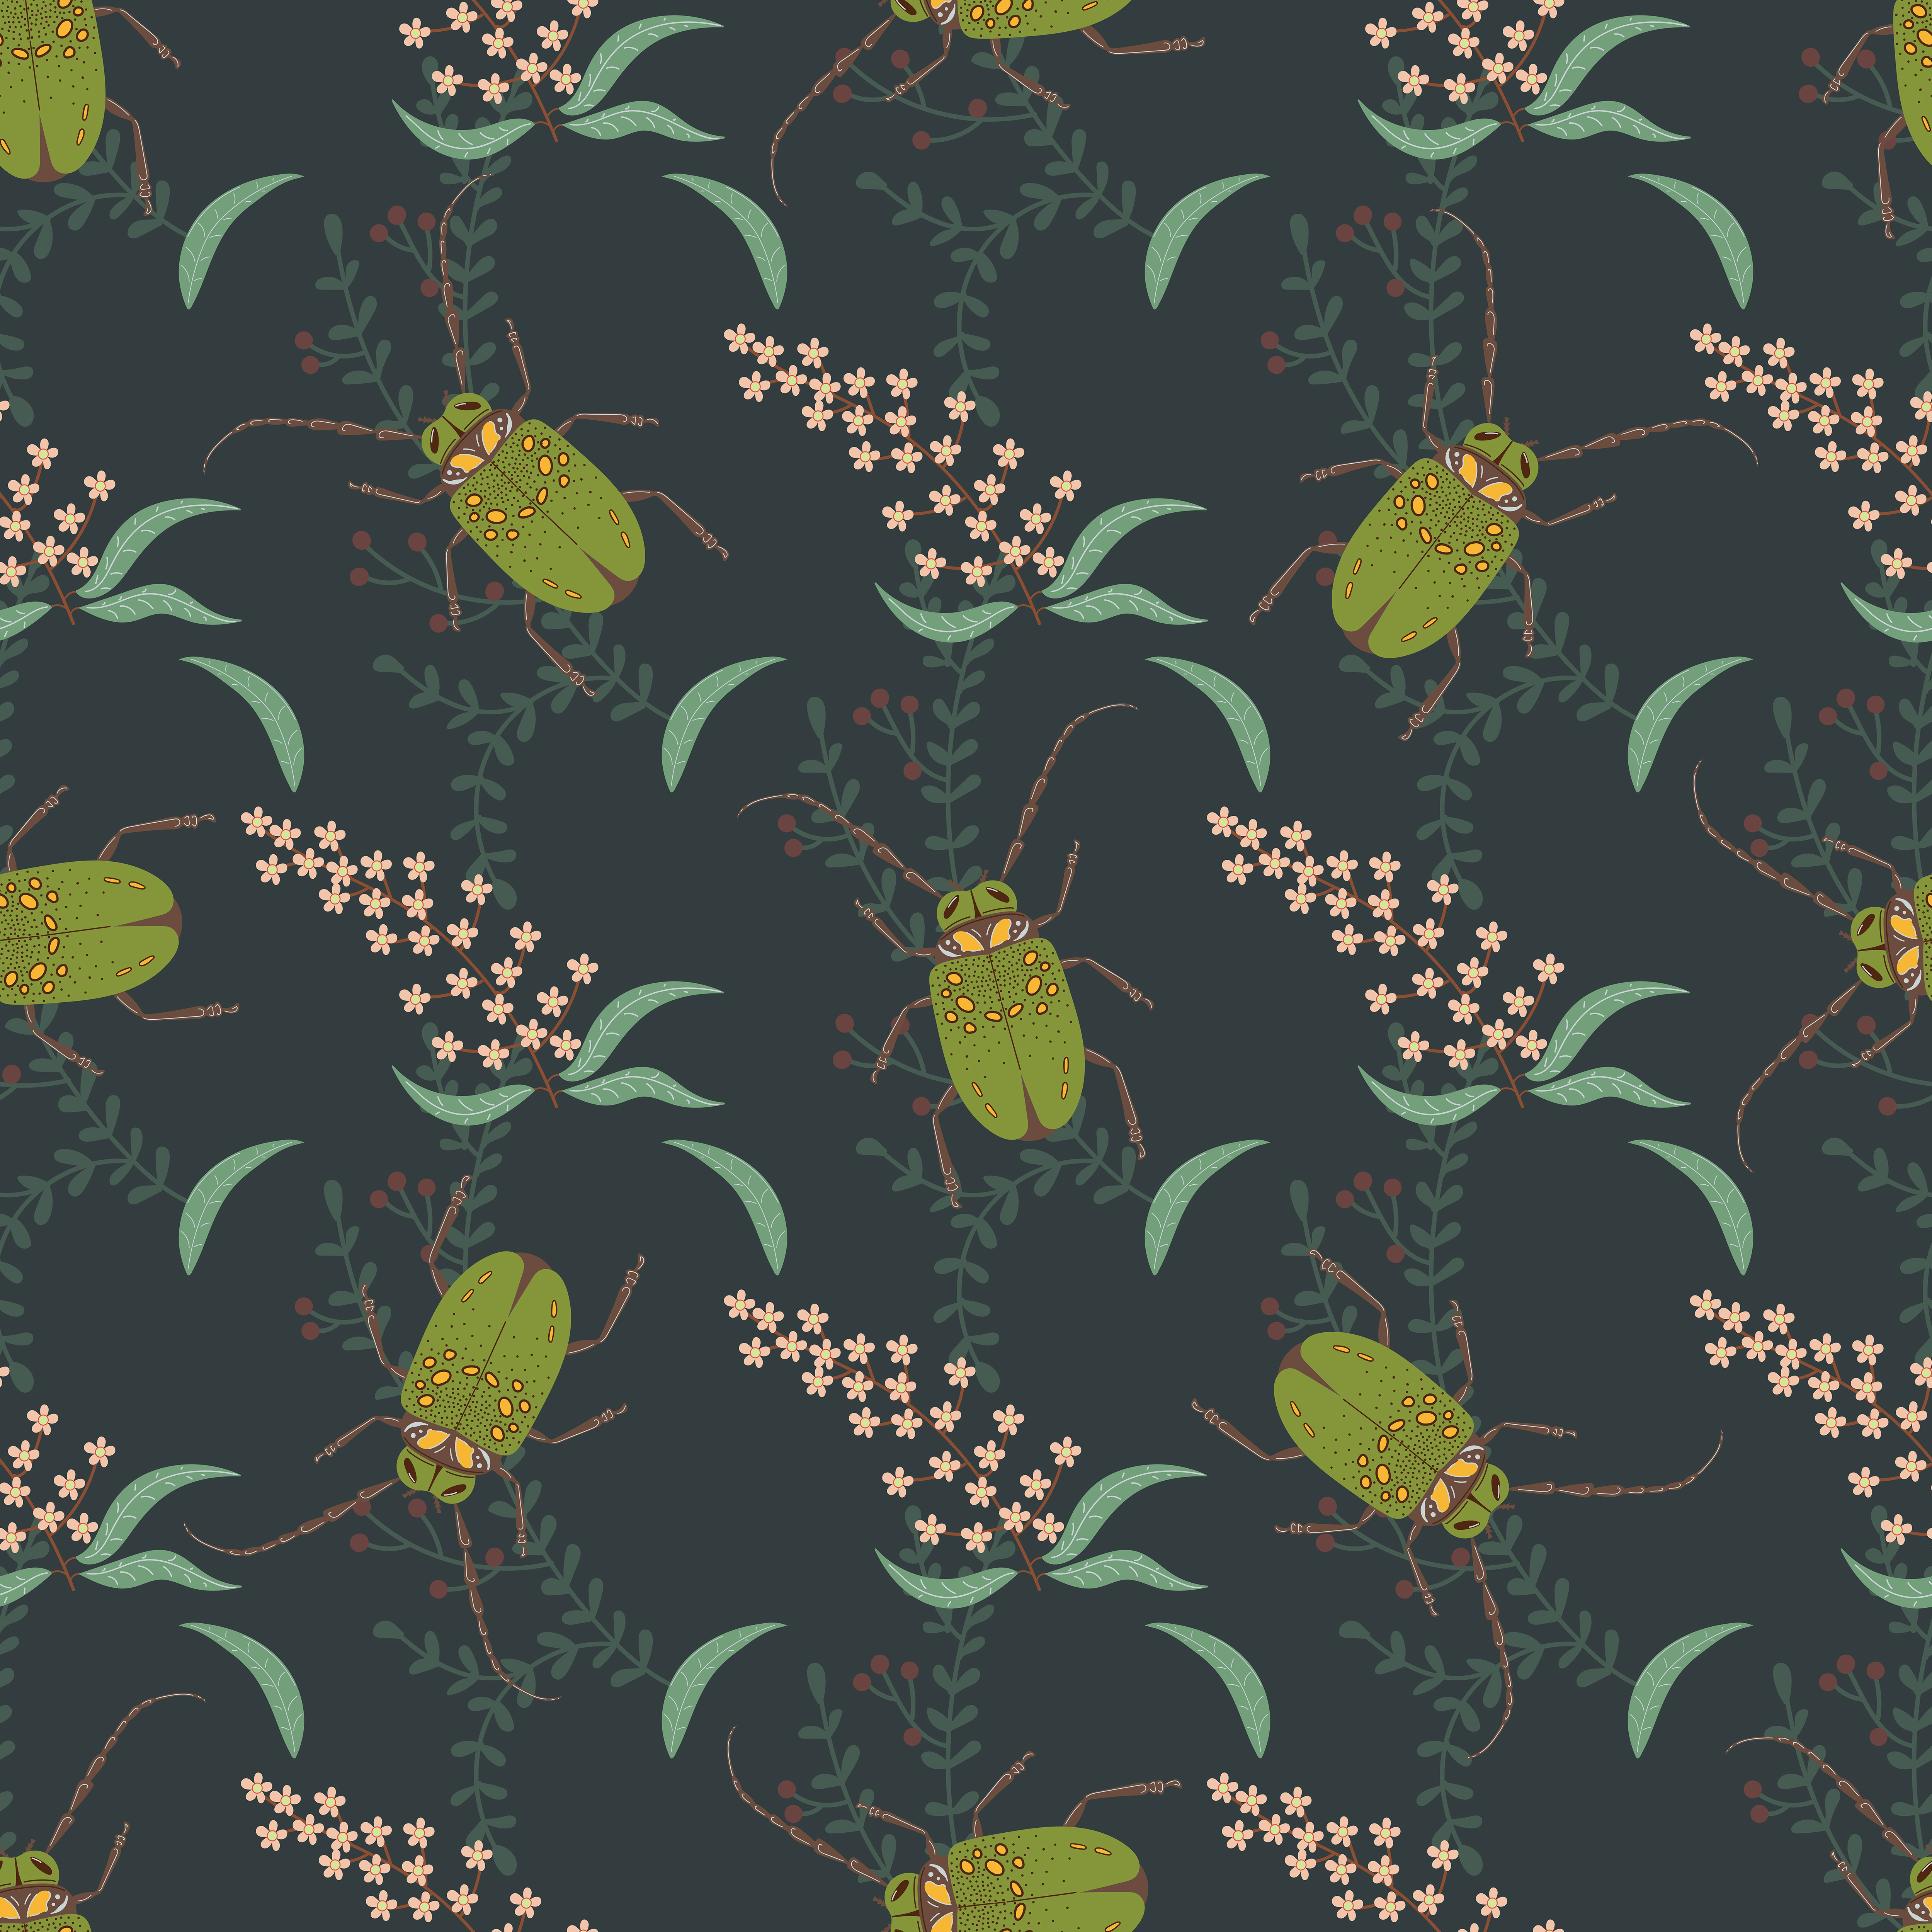 Seamless pattern with bugs black